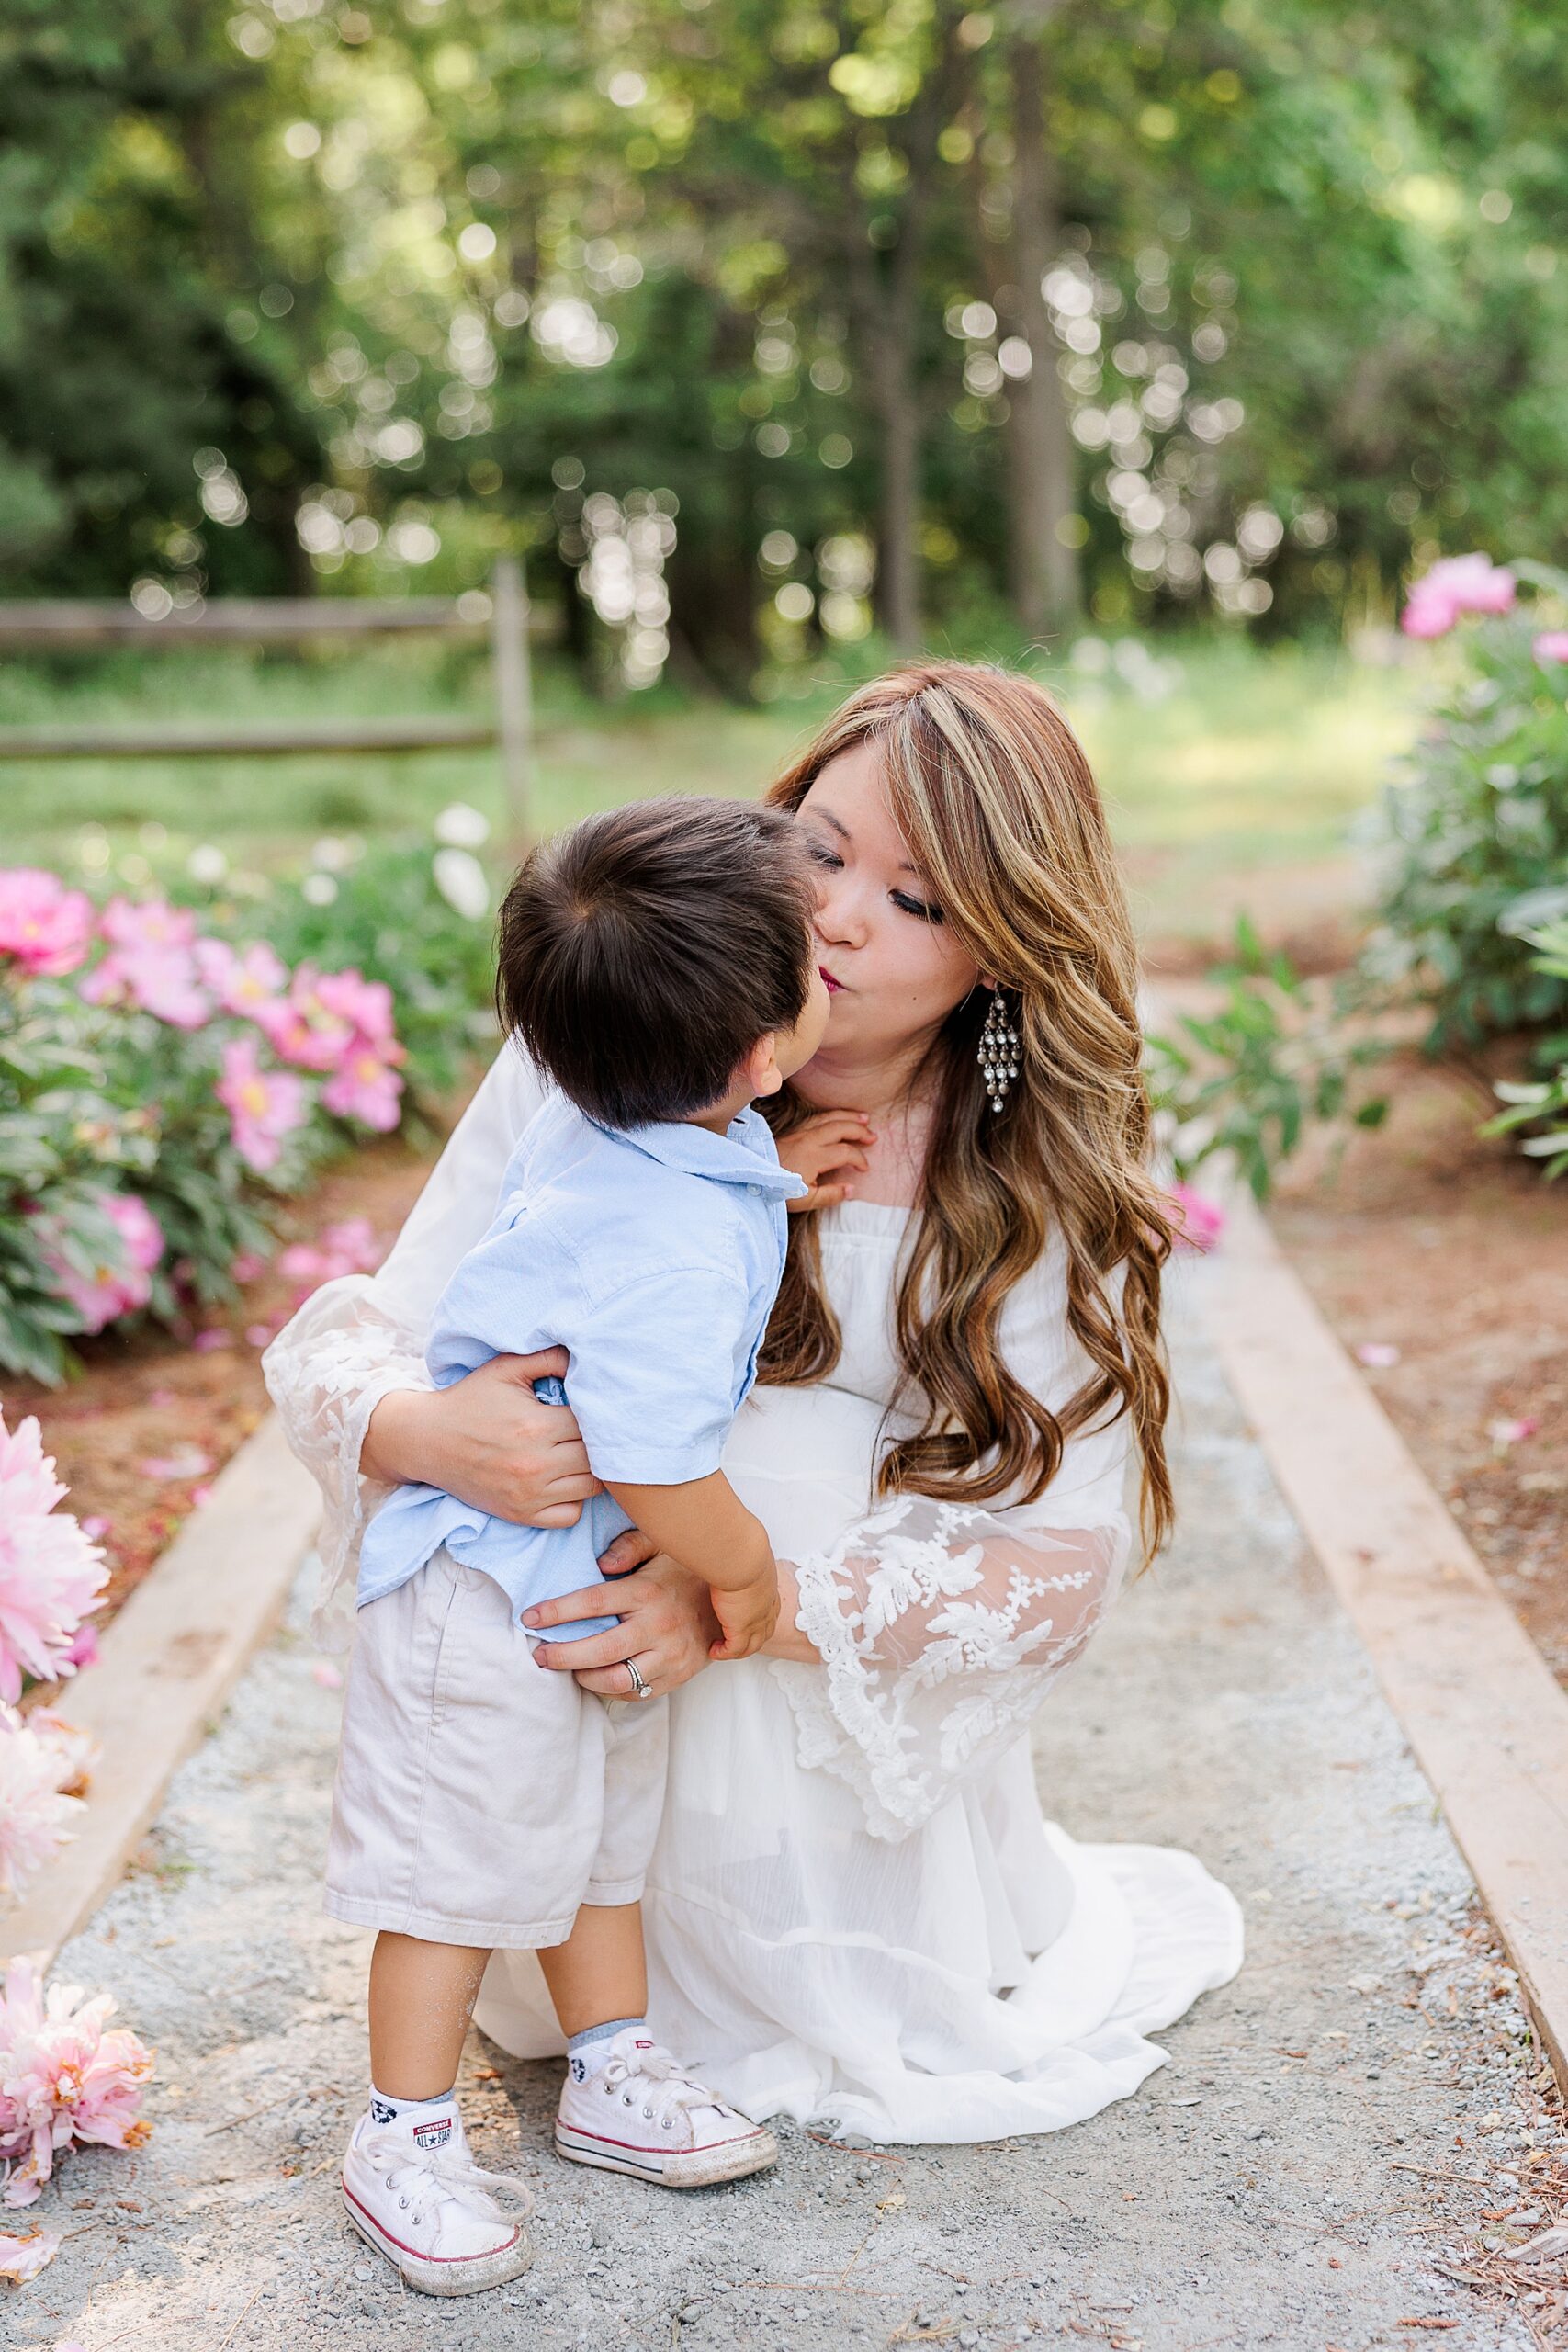 Do's & Don’ts for Your Family Photo Session from DC and Northern Virginia Family Photographer Christina Tundo Photography